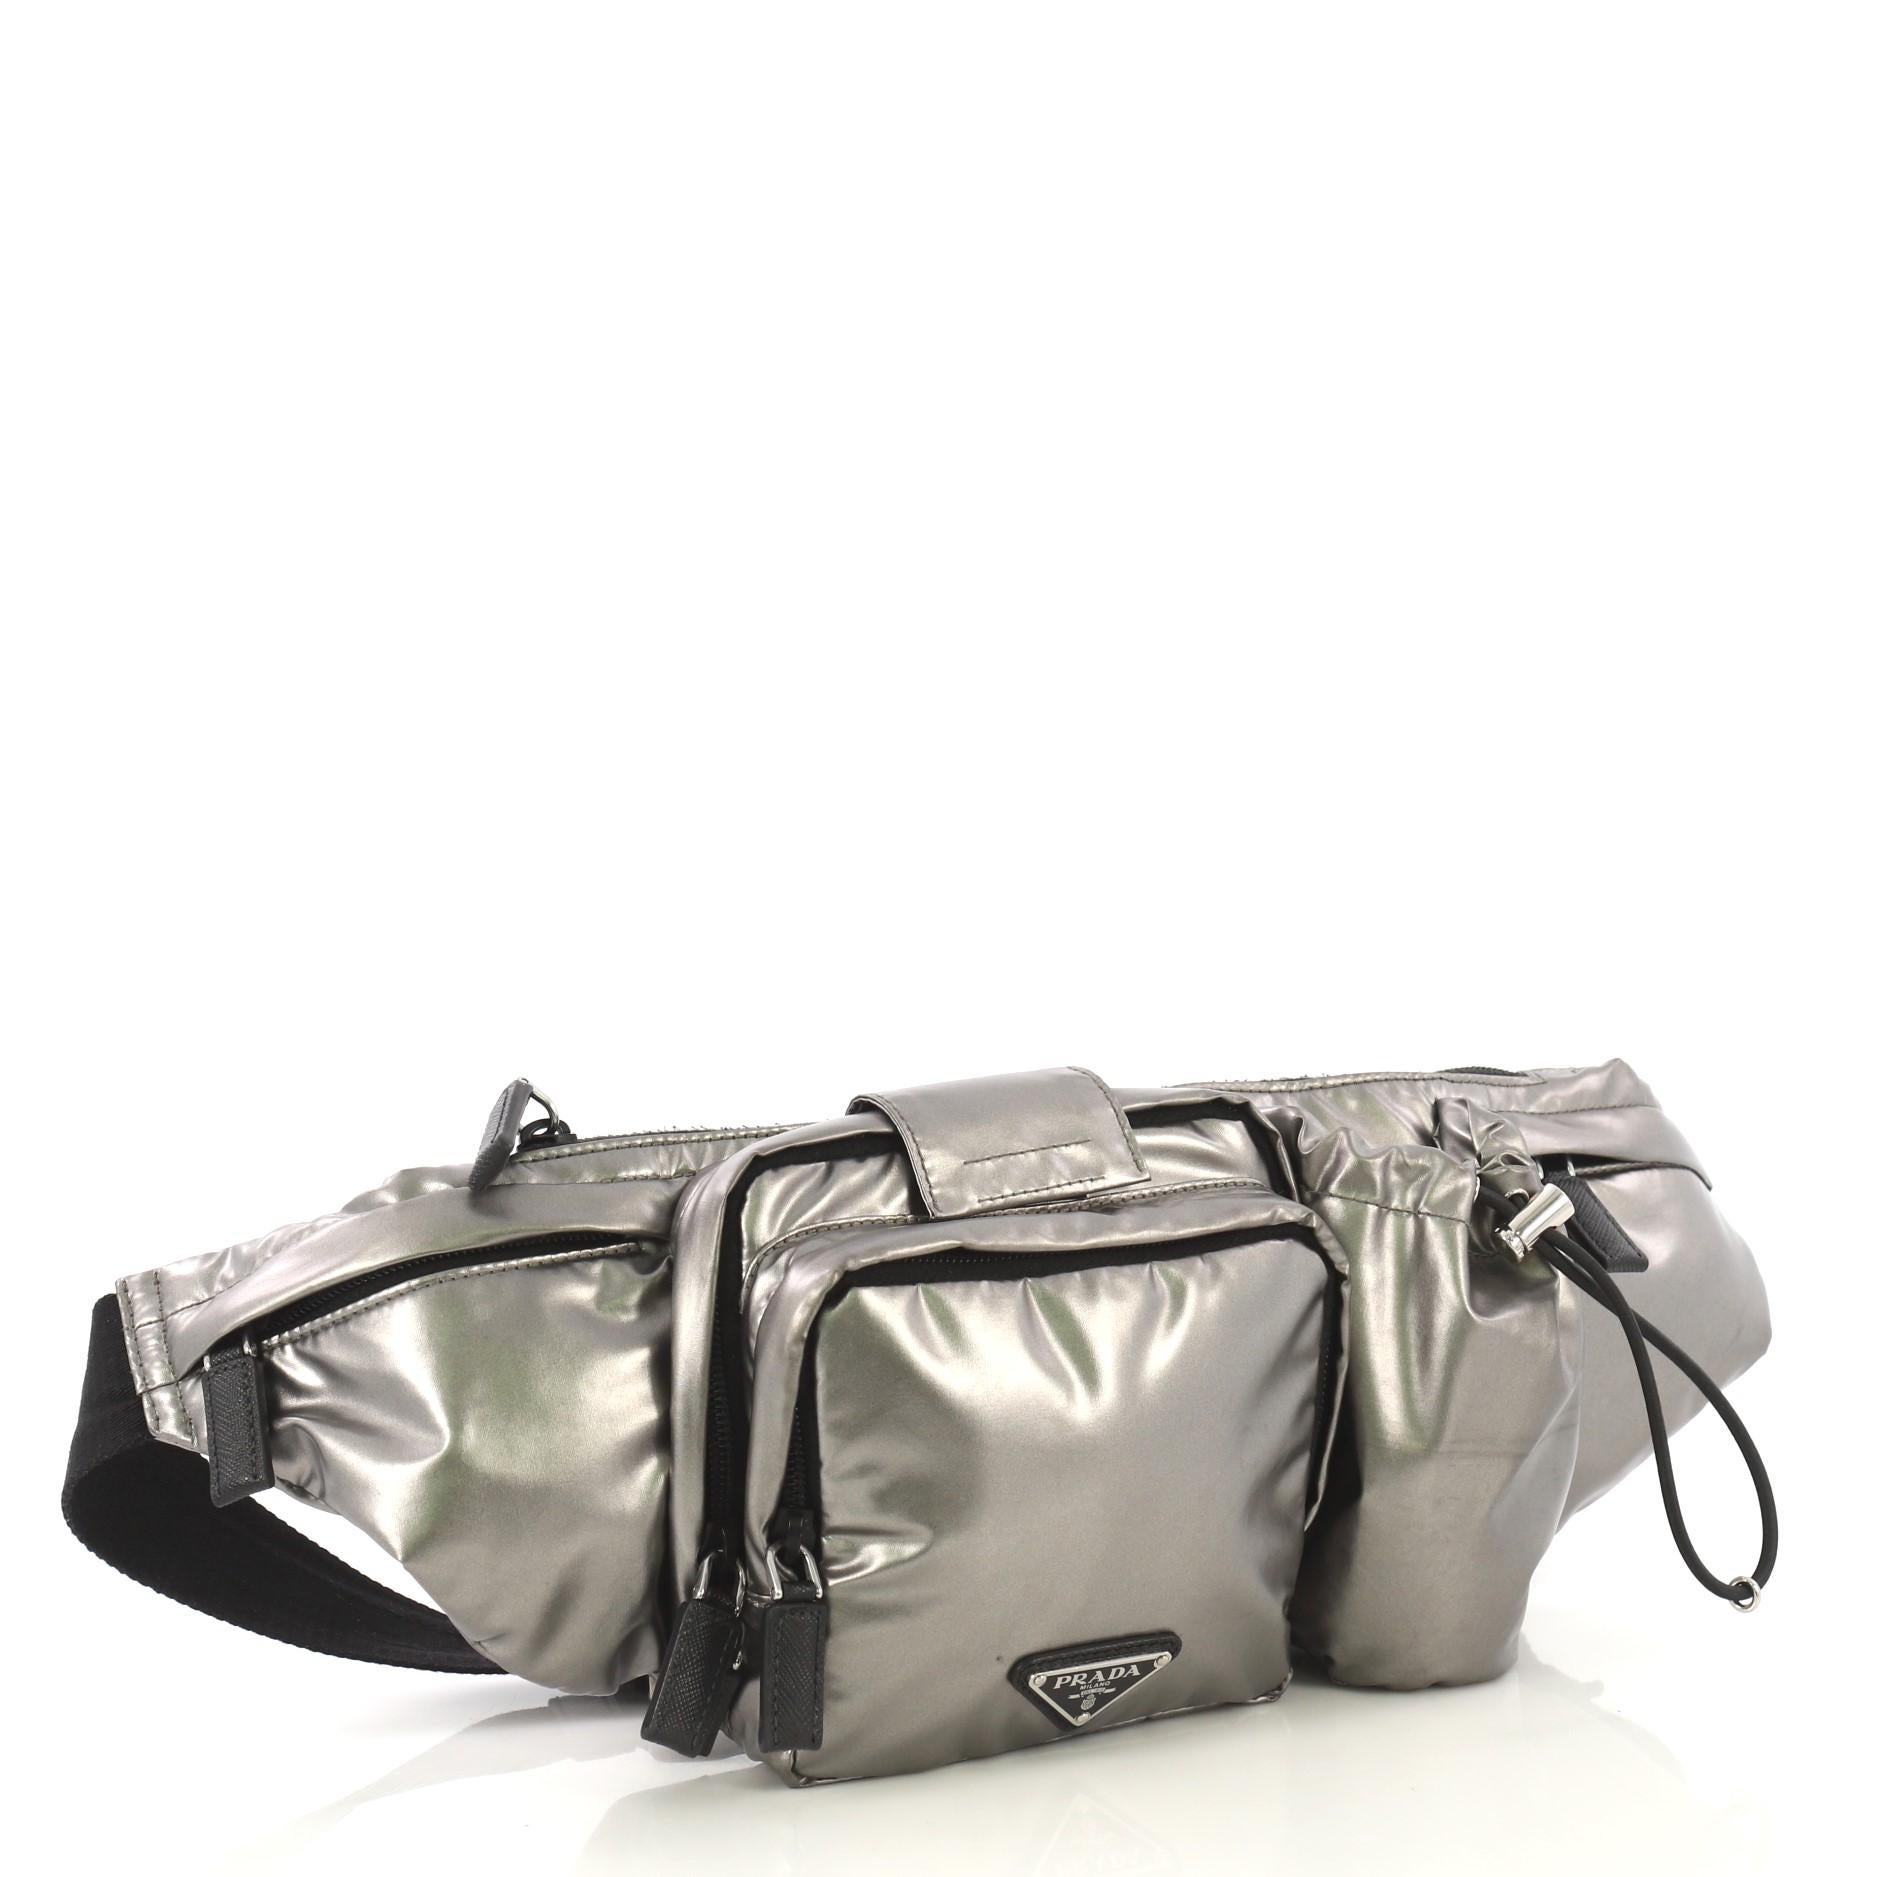 This Prada Convertible Multipocket Belt Bag Tessuto Medium, crafted in silver metallic tessuto, features an adjustable belt strap, multiple exterior pockets, and and silver-tone hardware. Its top zip closure opens to a black nylon interior.